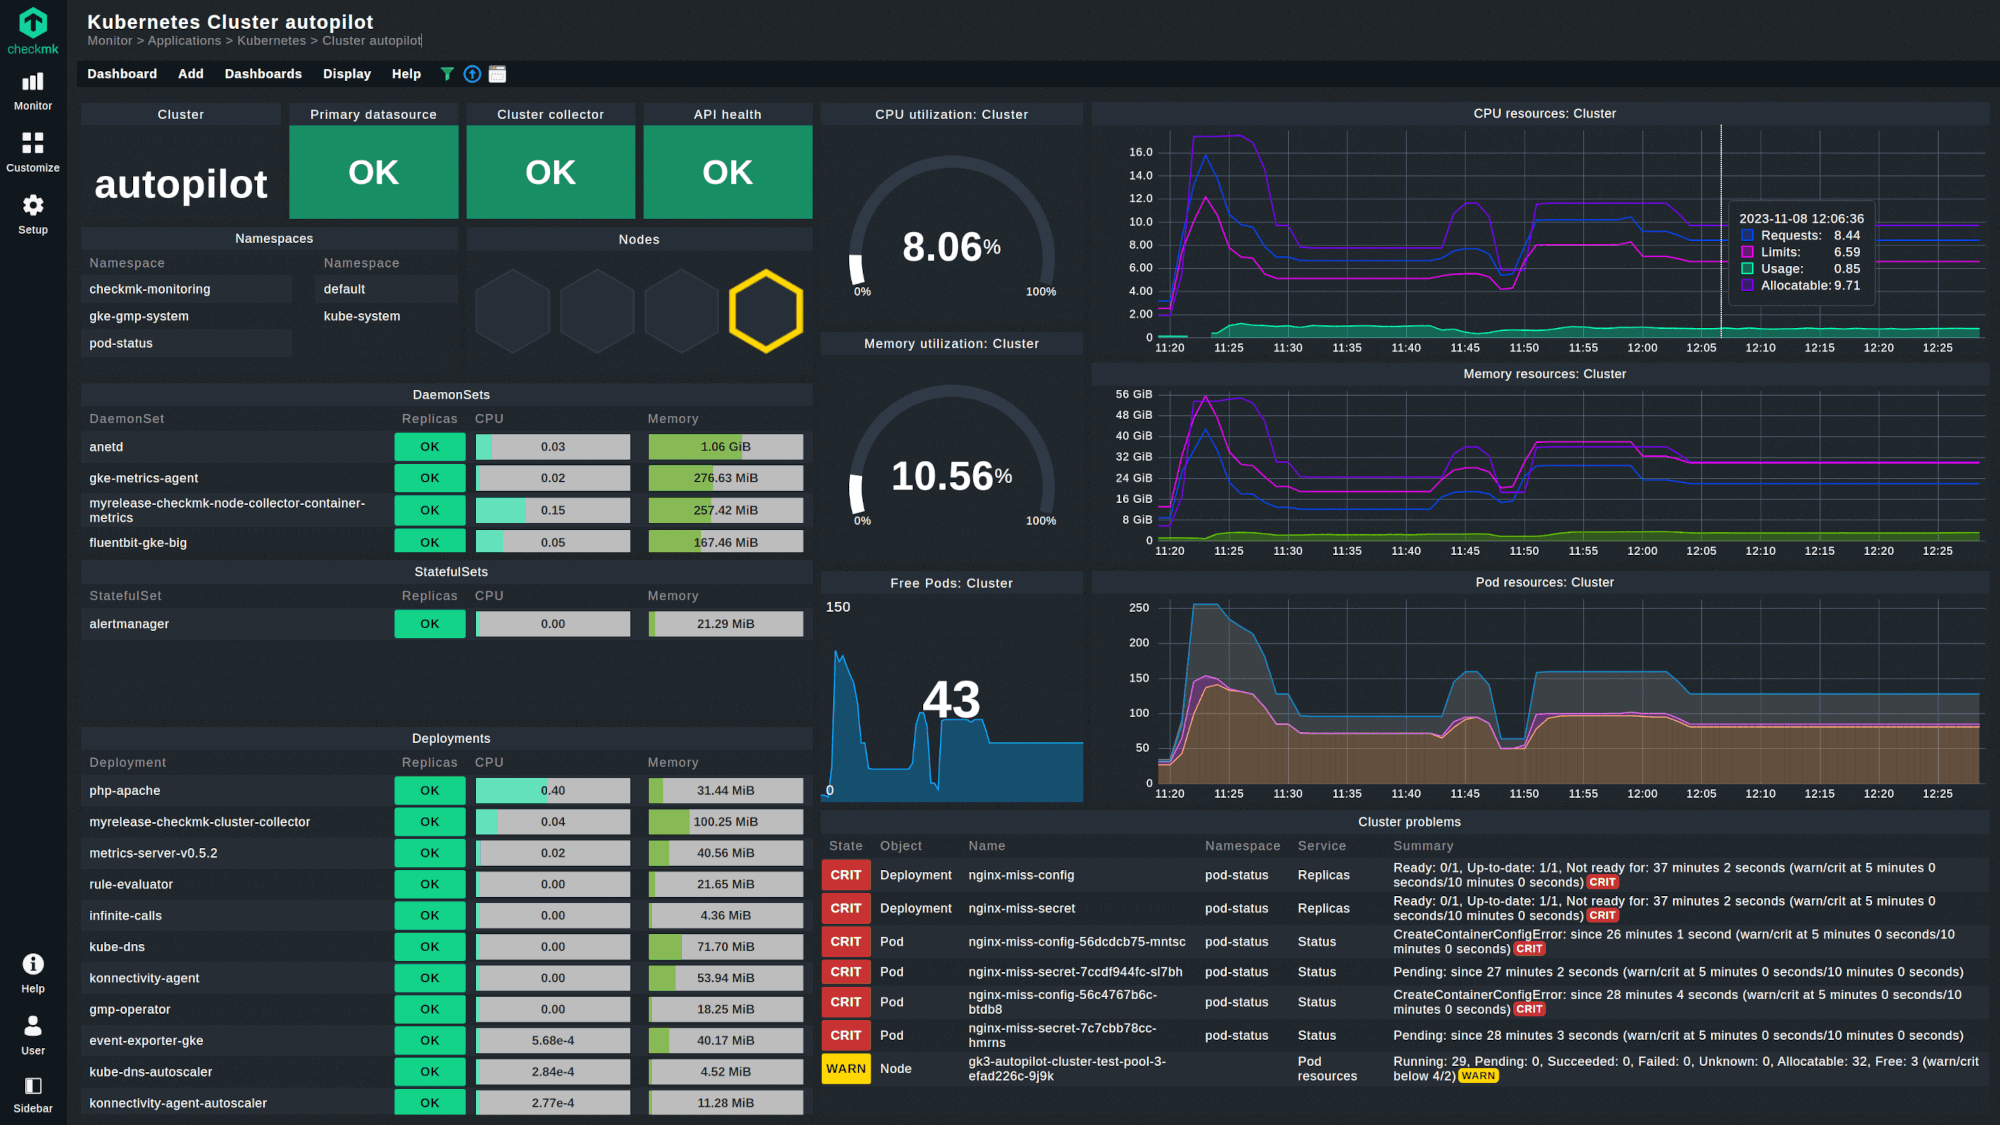 Image showing the Kubernetes Cluster autopilot dashboard in Checkmk